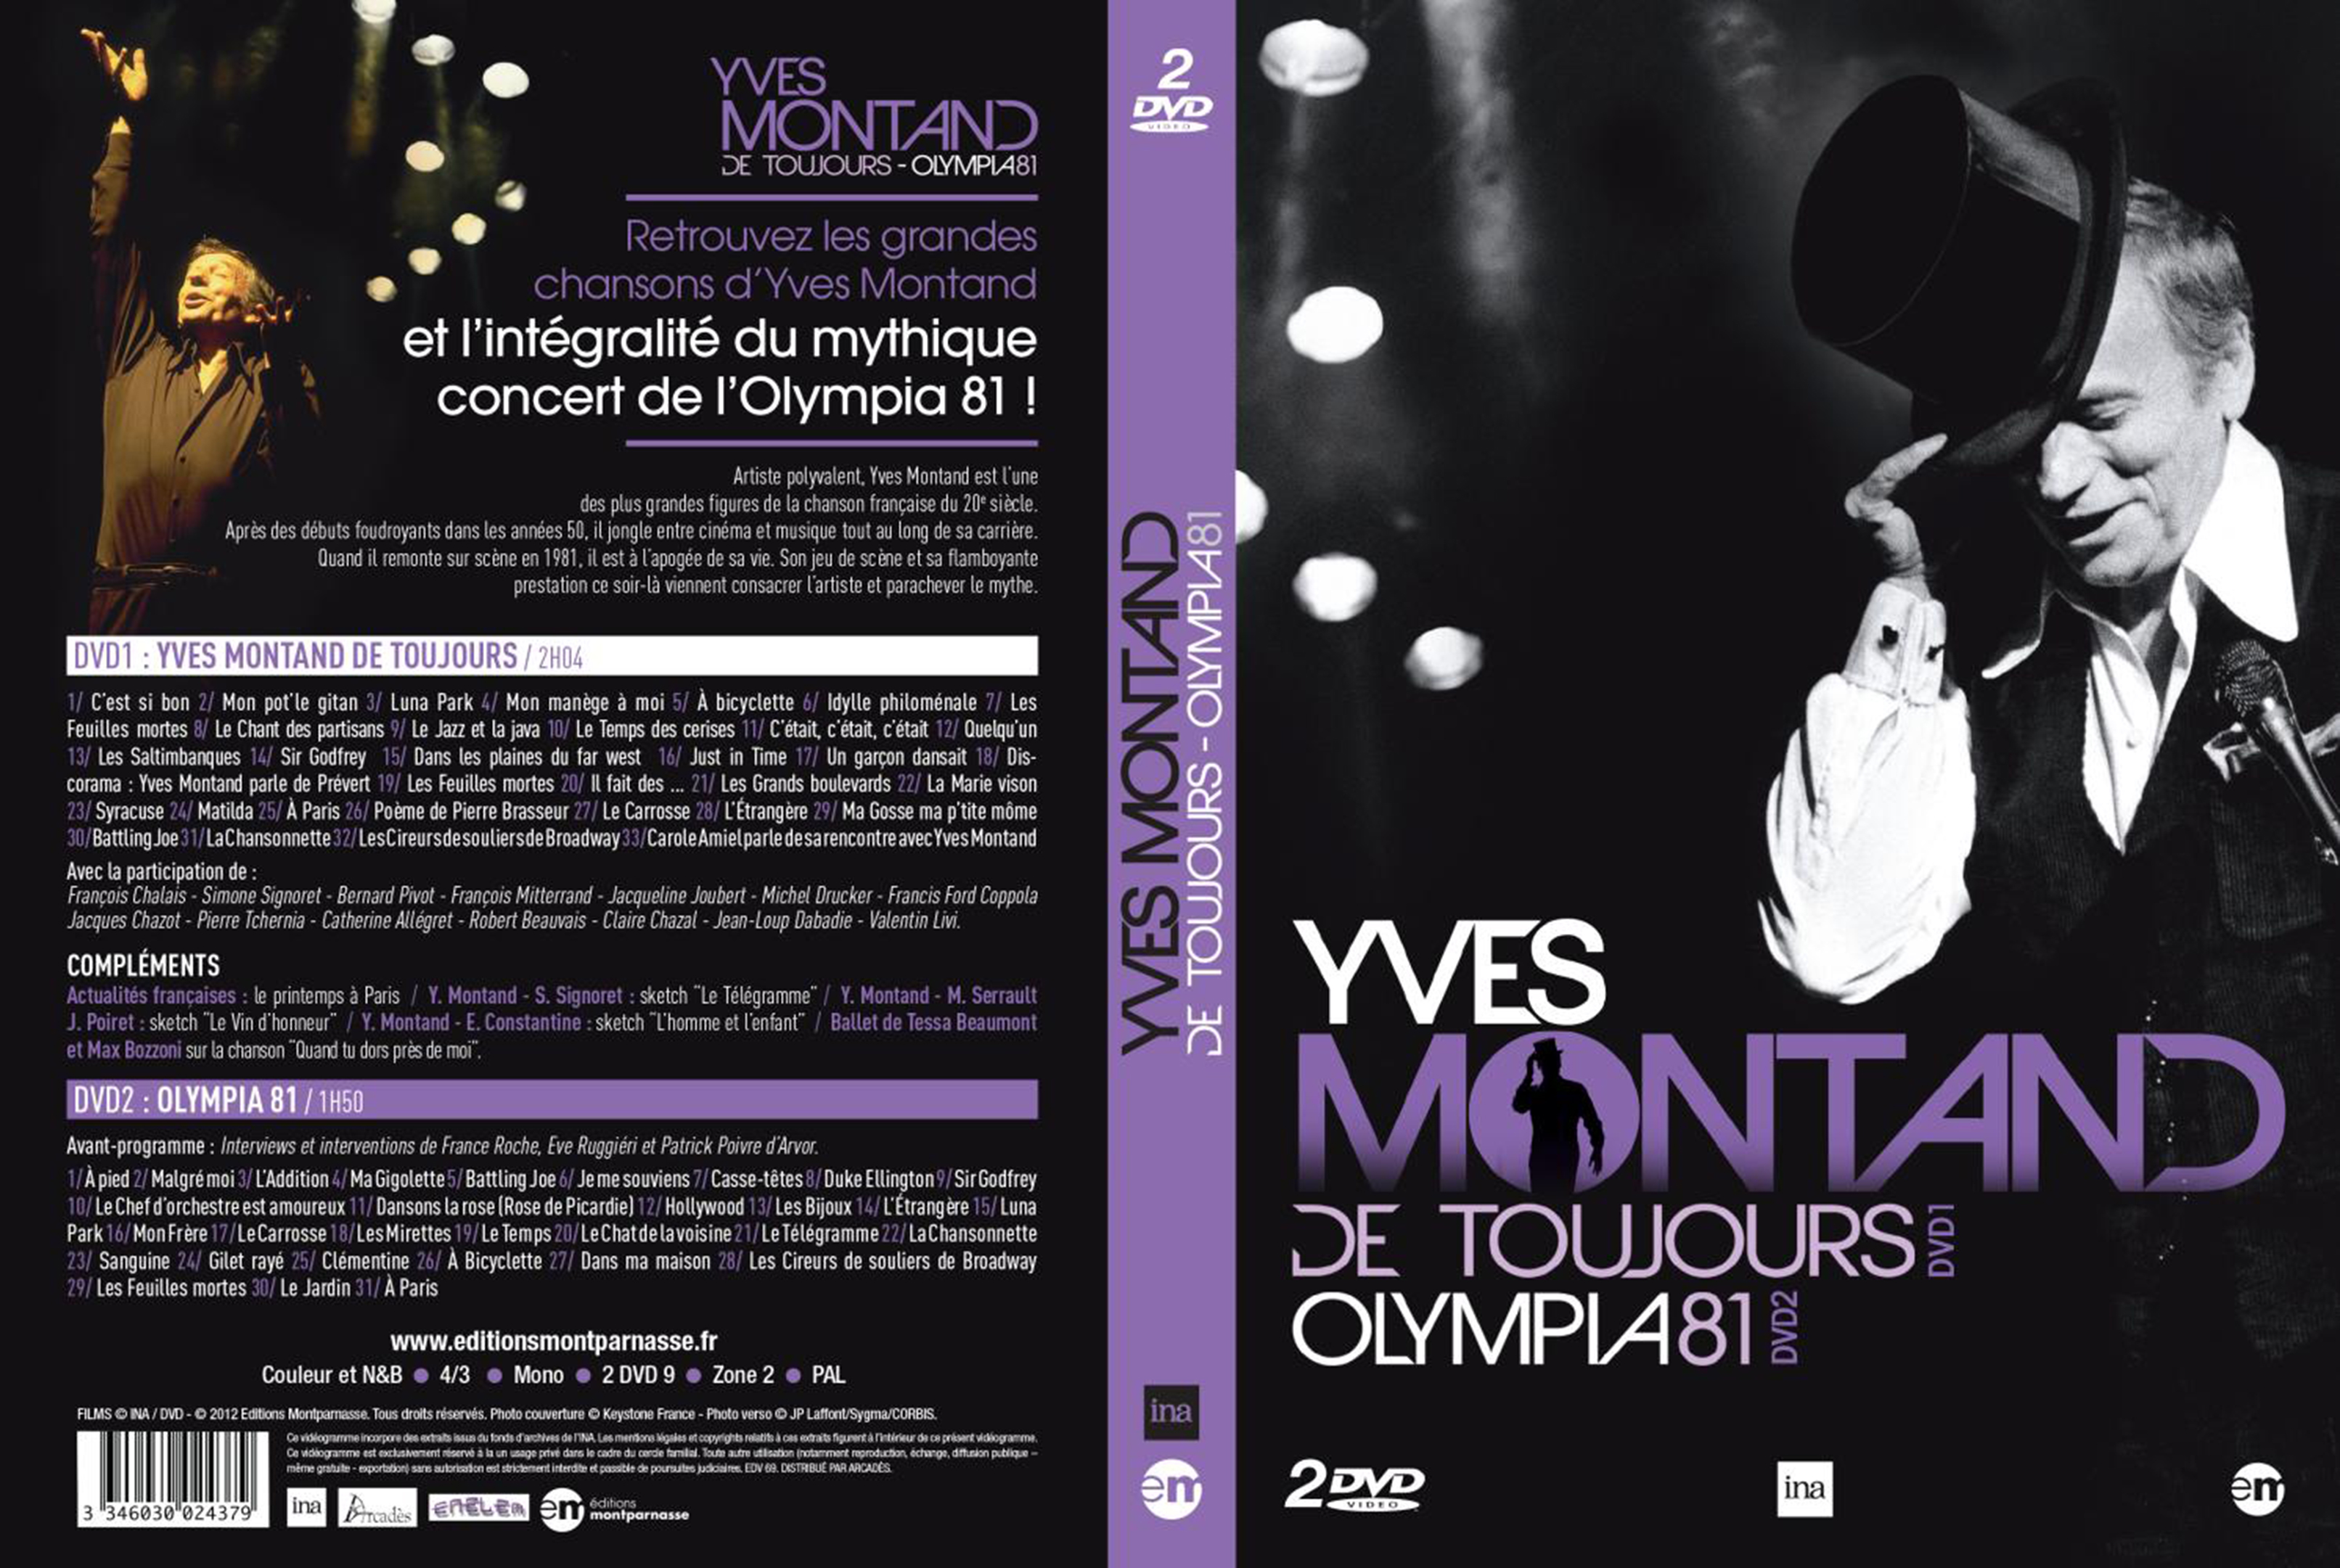 Jaquette DVD Yves Montand de toujours - Olympia 81